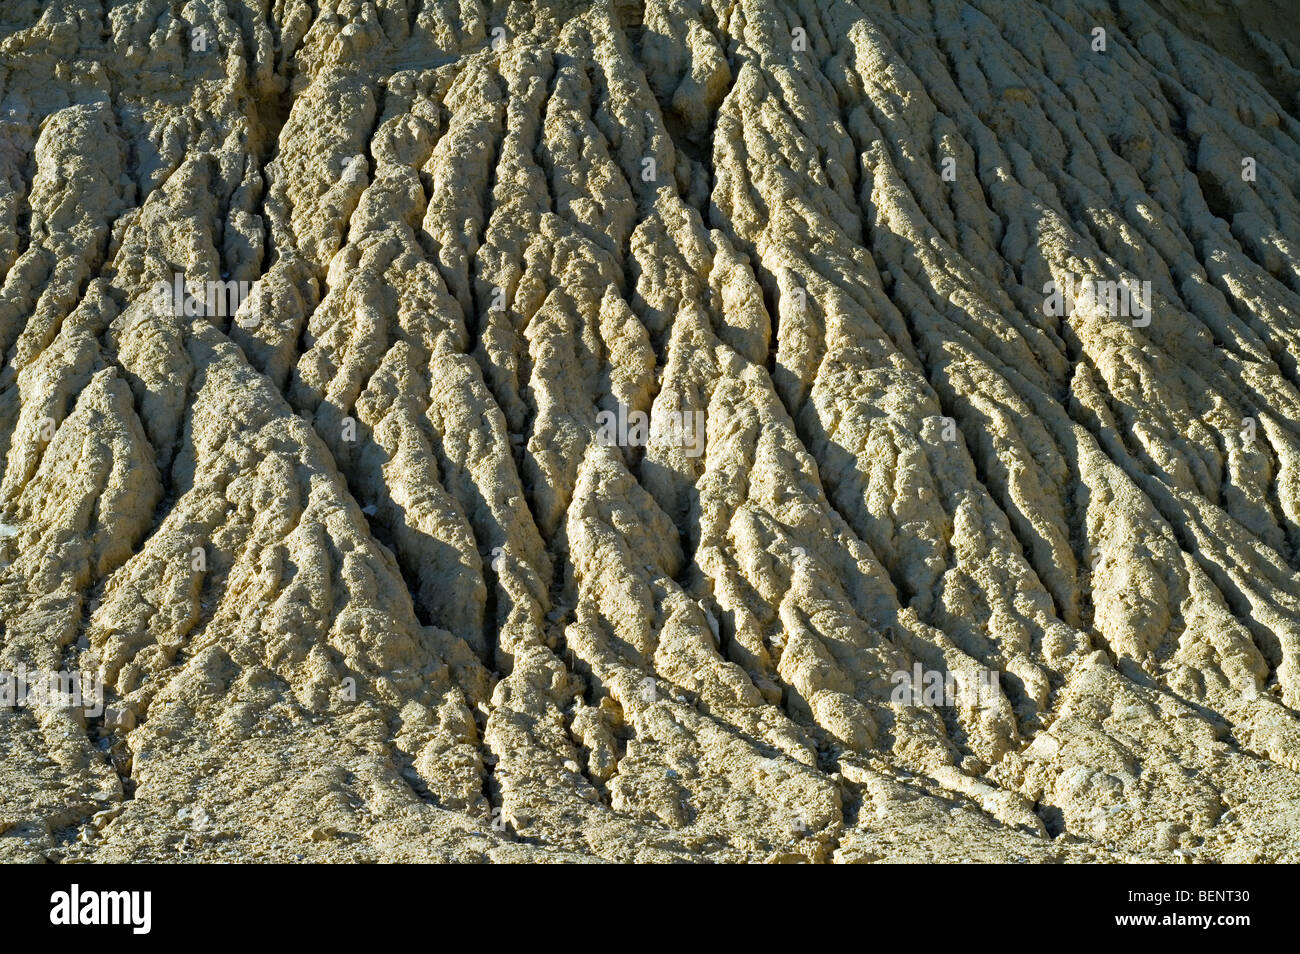 Gullies in soft rock of cliff caused by rain water erosion Stock Photo